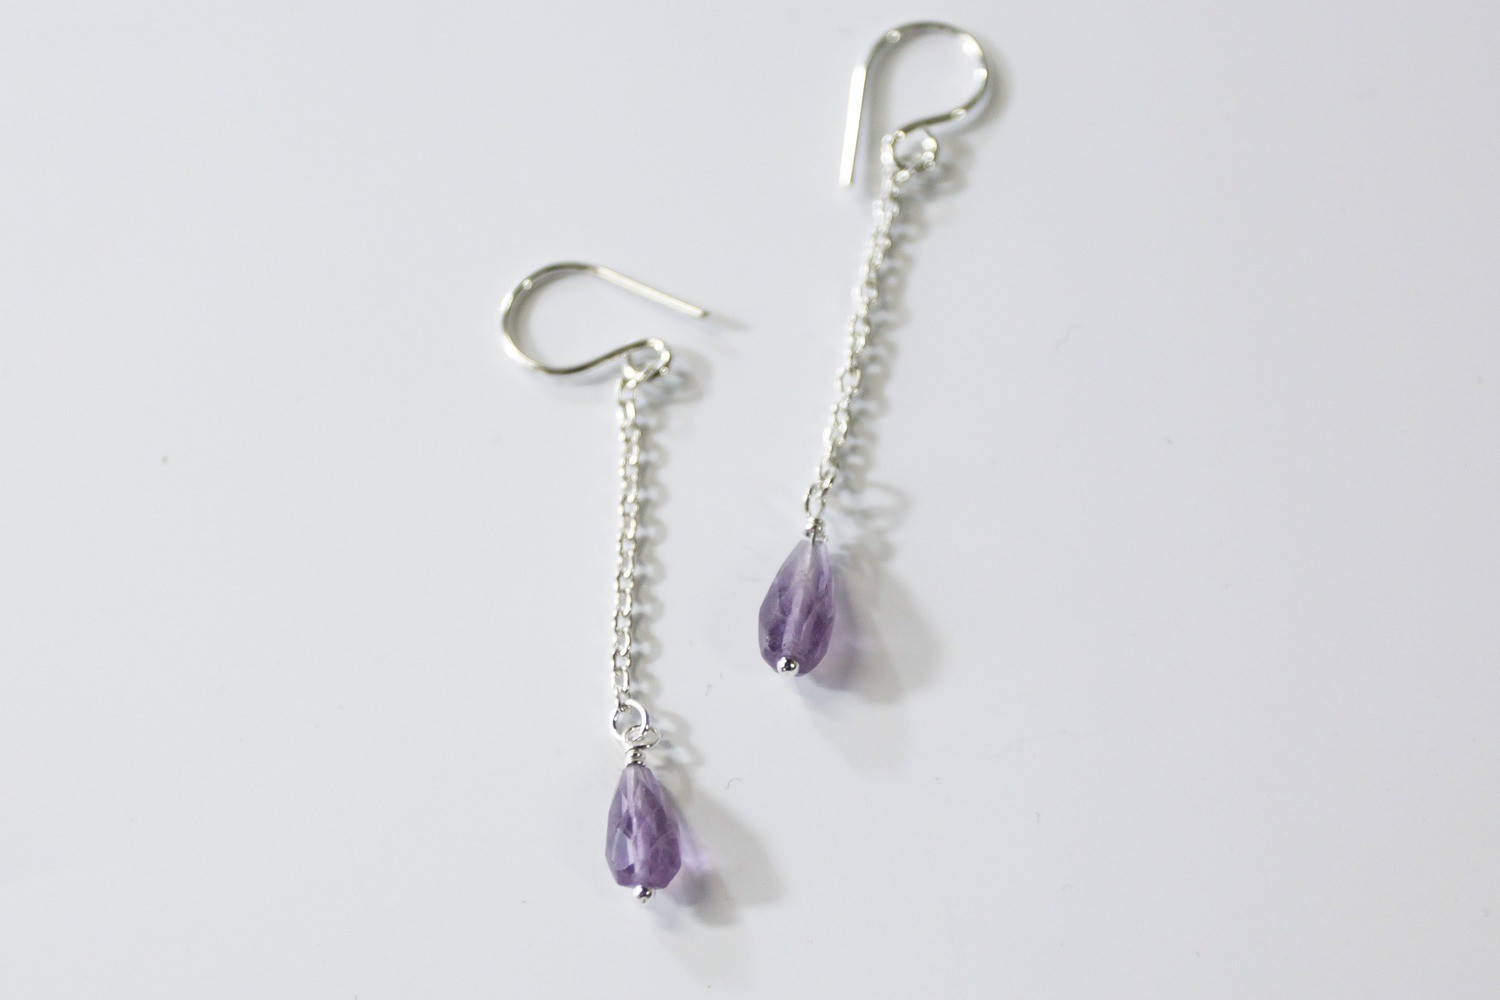 Bead and chain earrings with amethyst